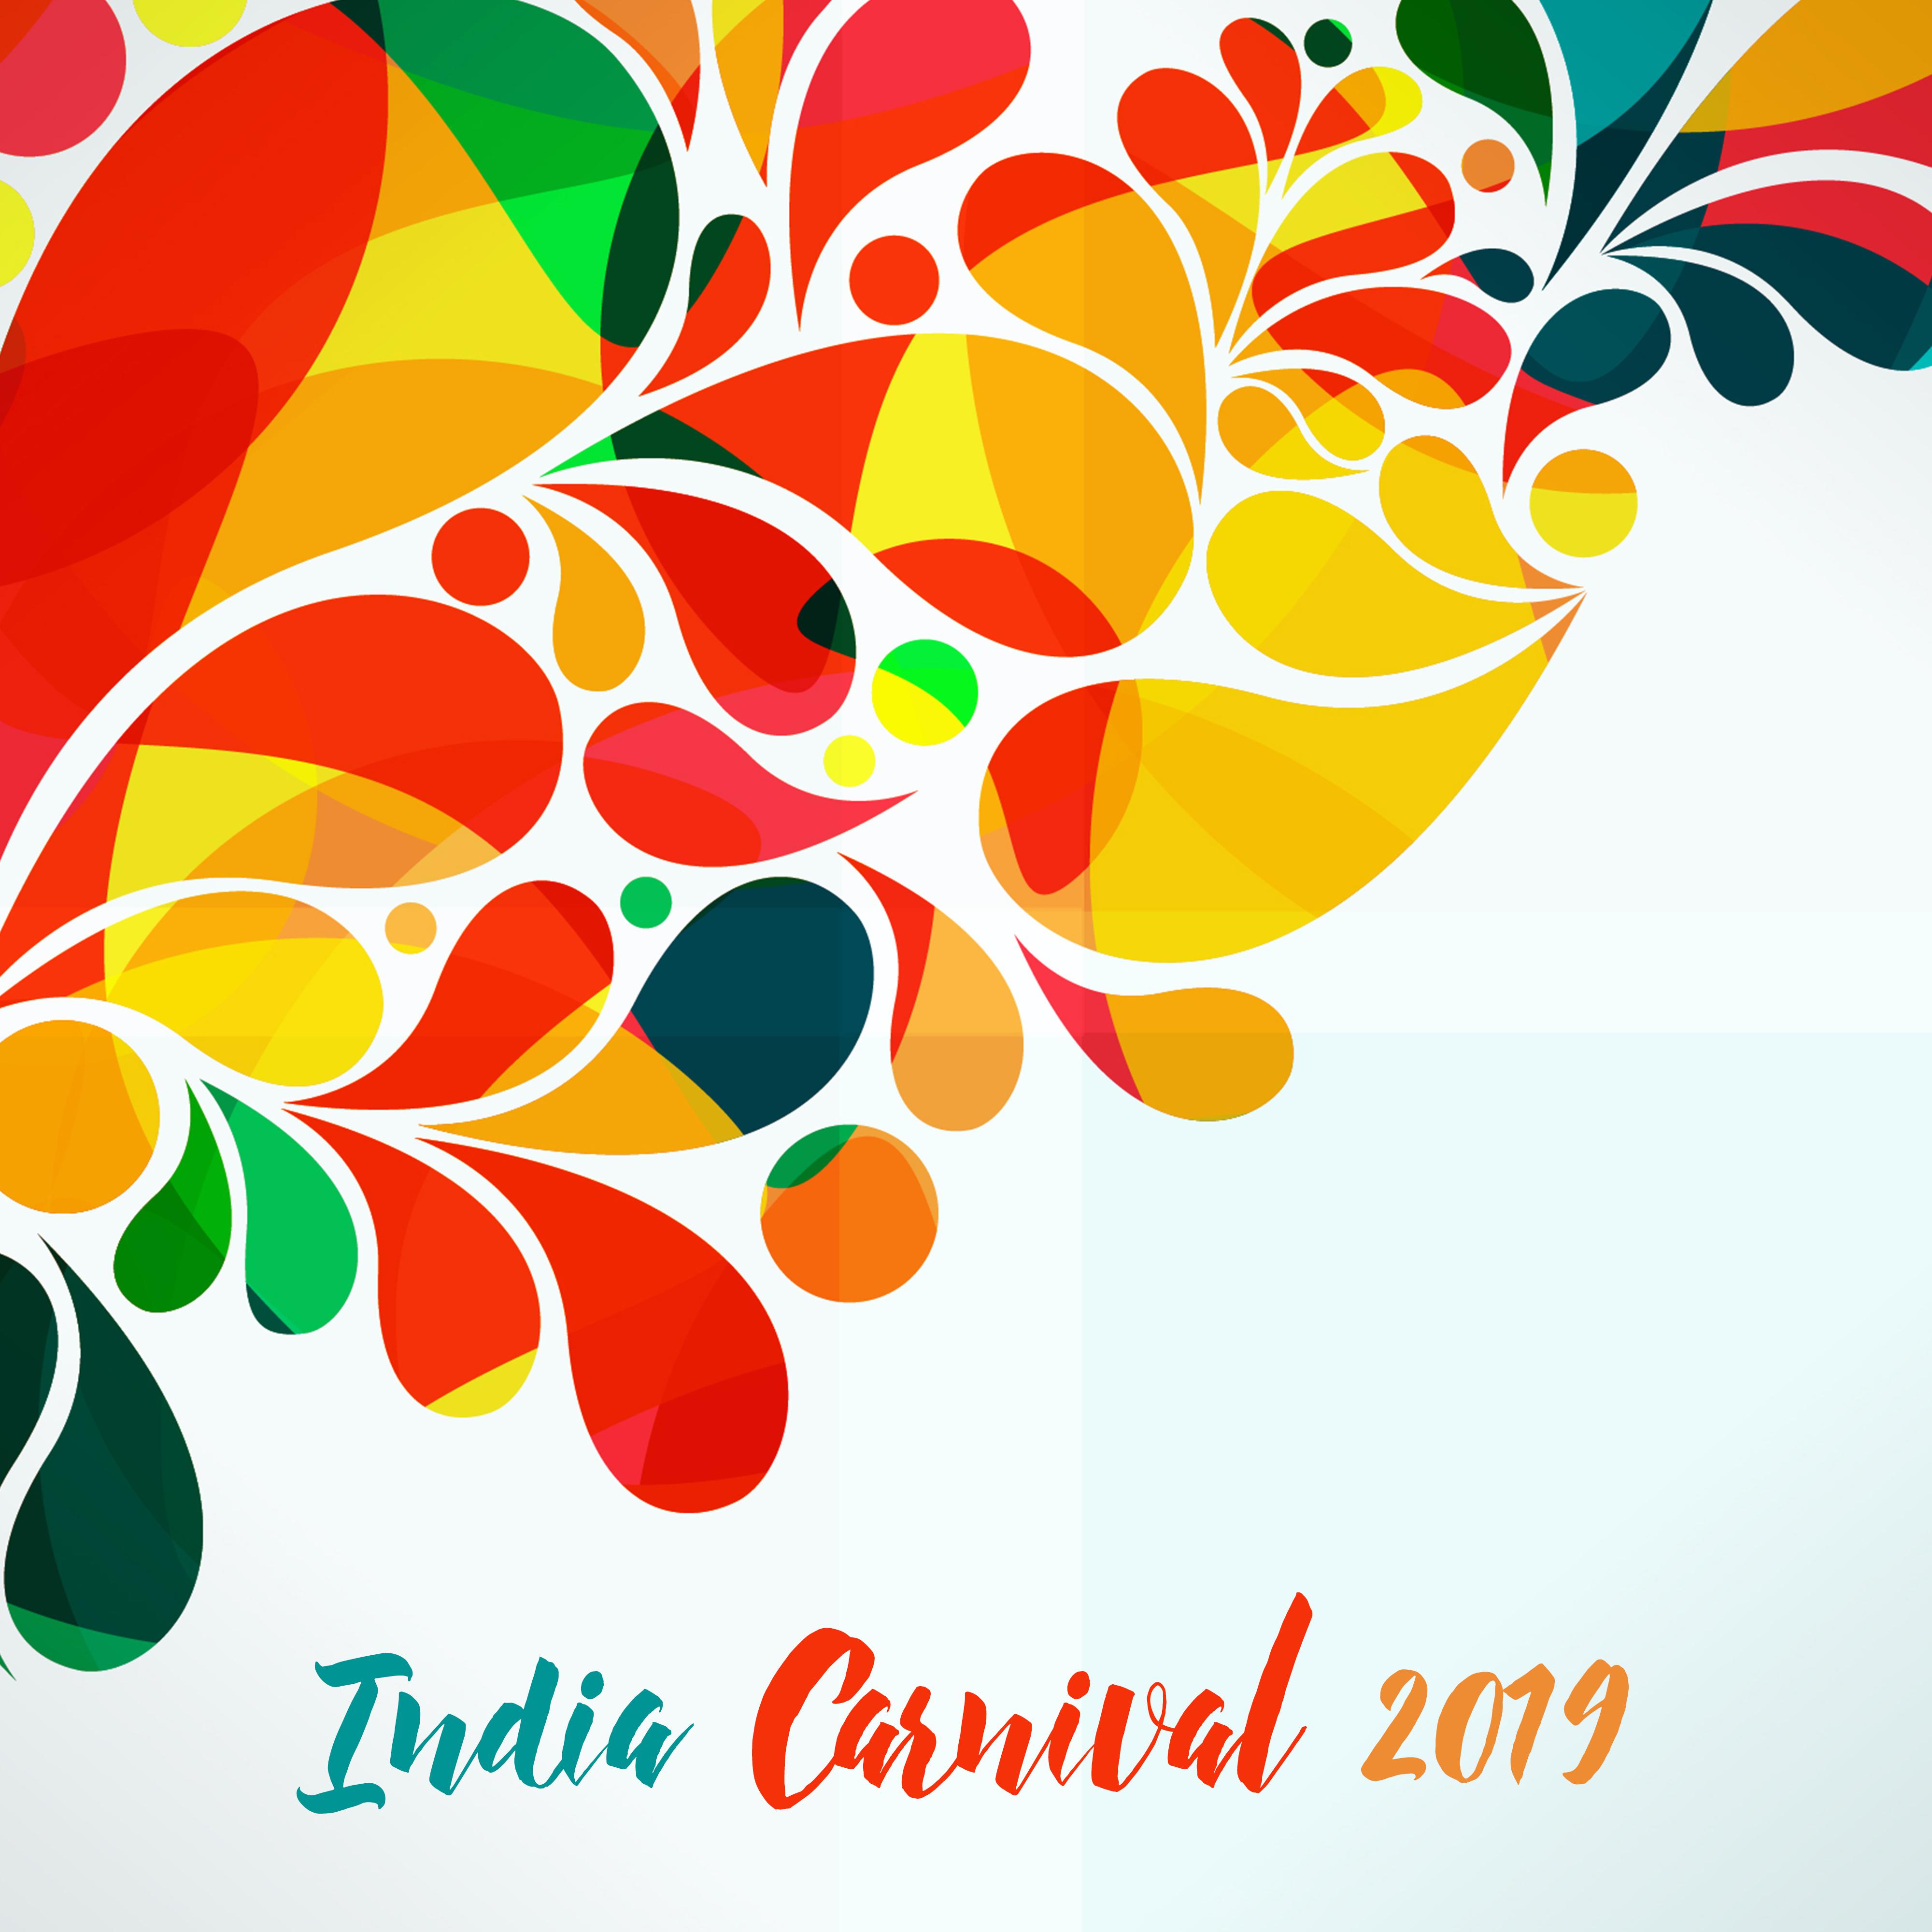 India Carnival 2019  Oriental Chill Out, Tantric Hits, Chillout Lounge, Erotic Dance, India Party 2019